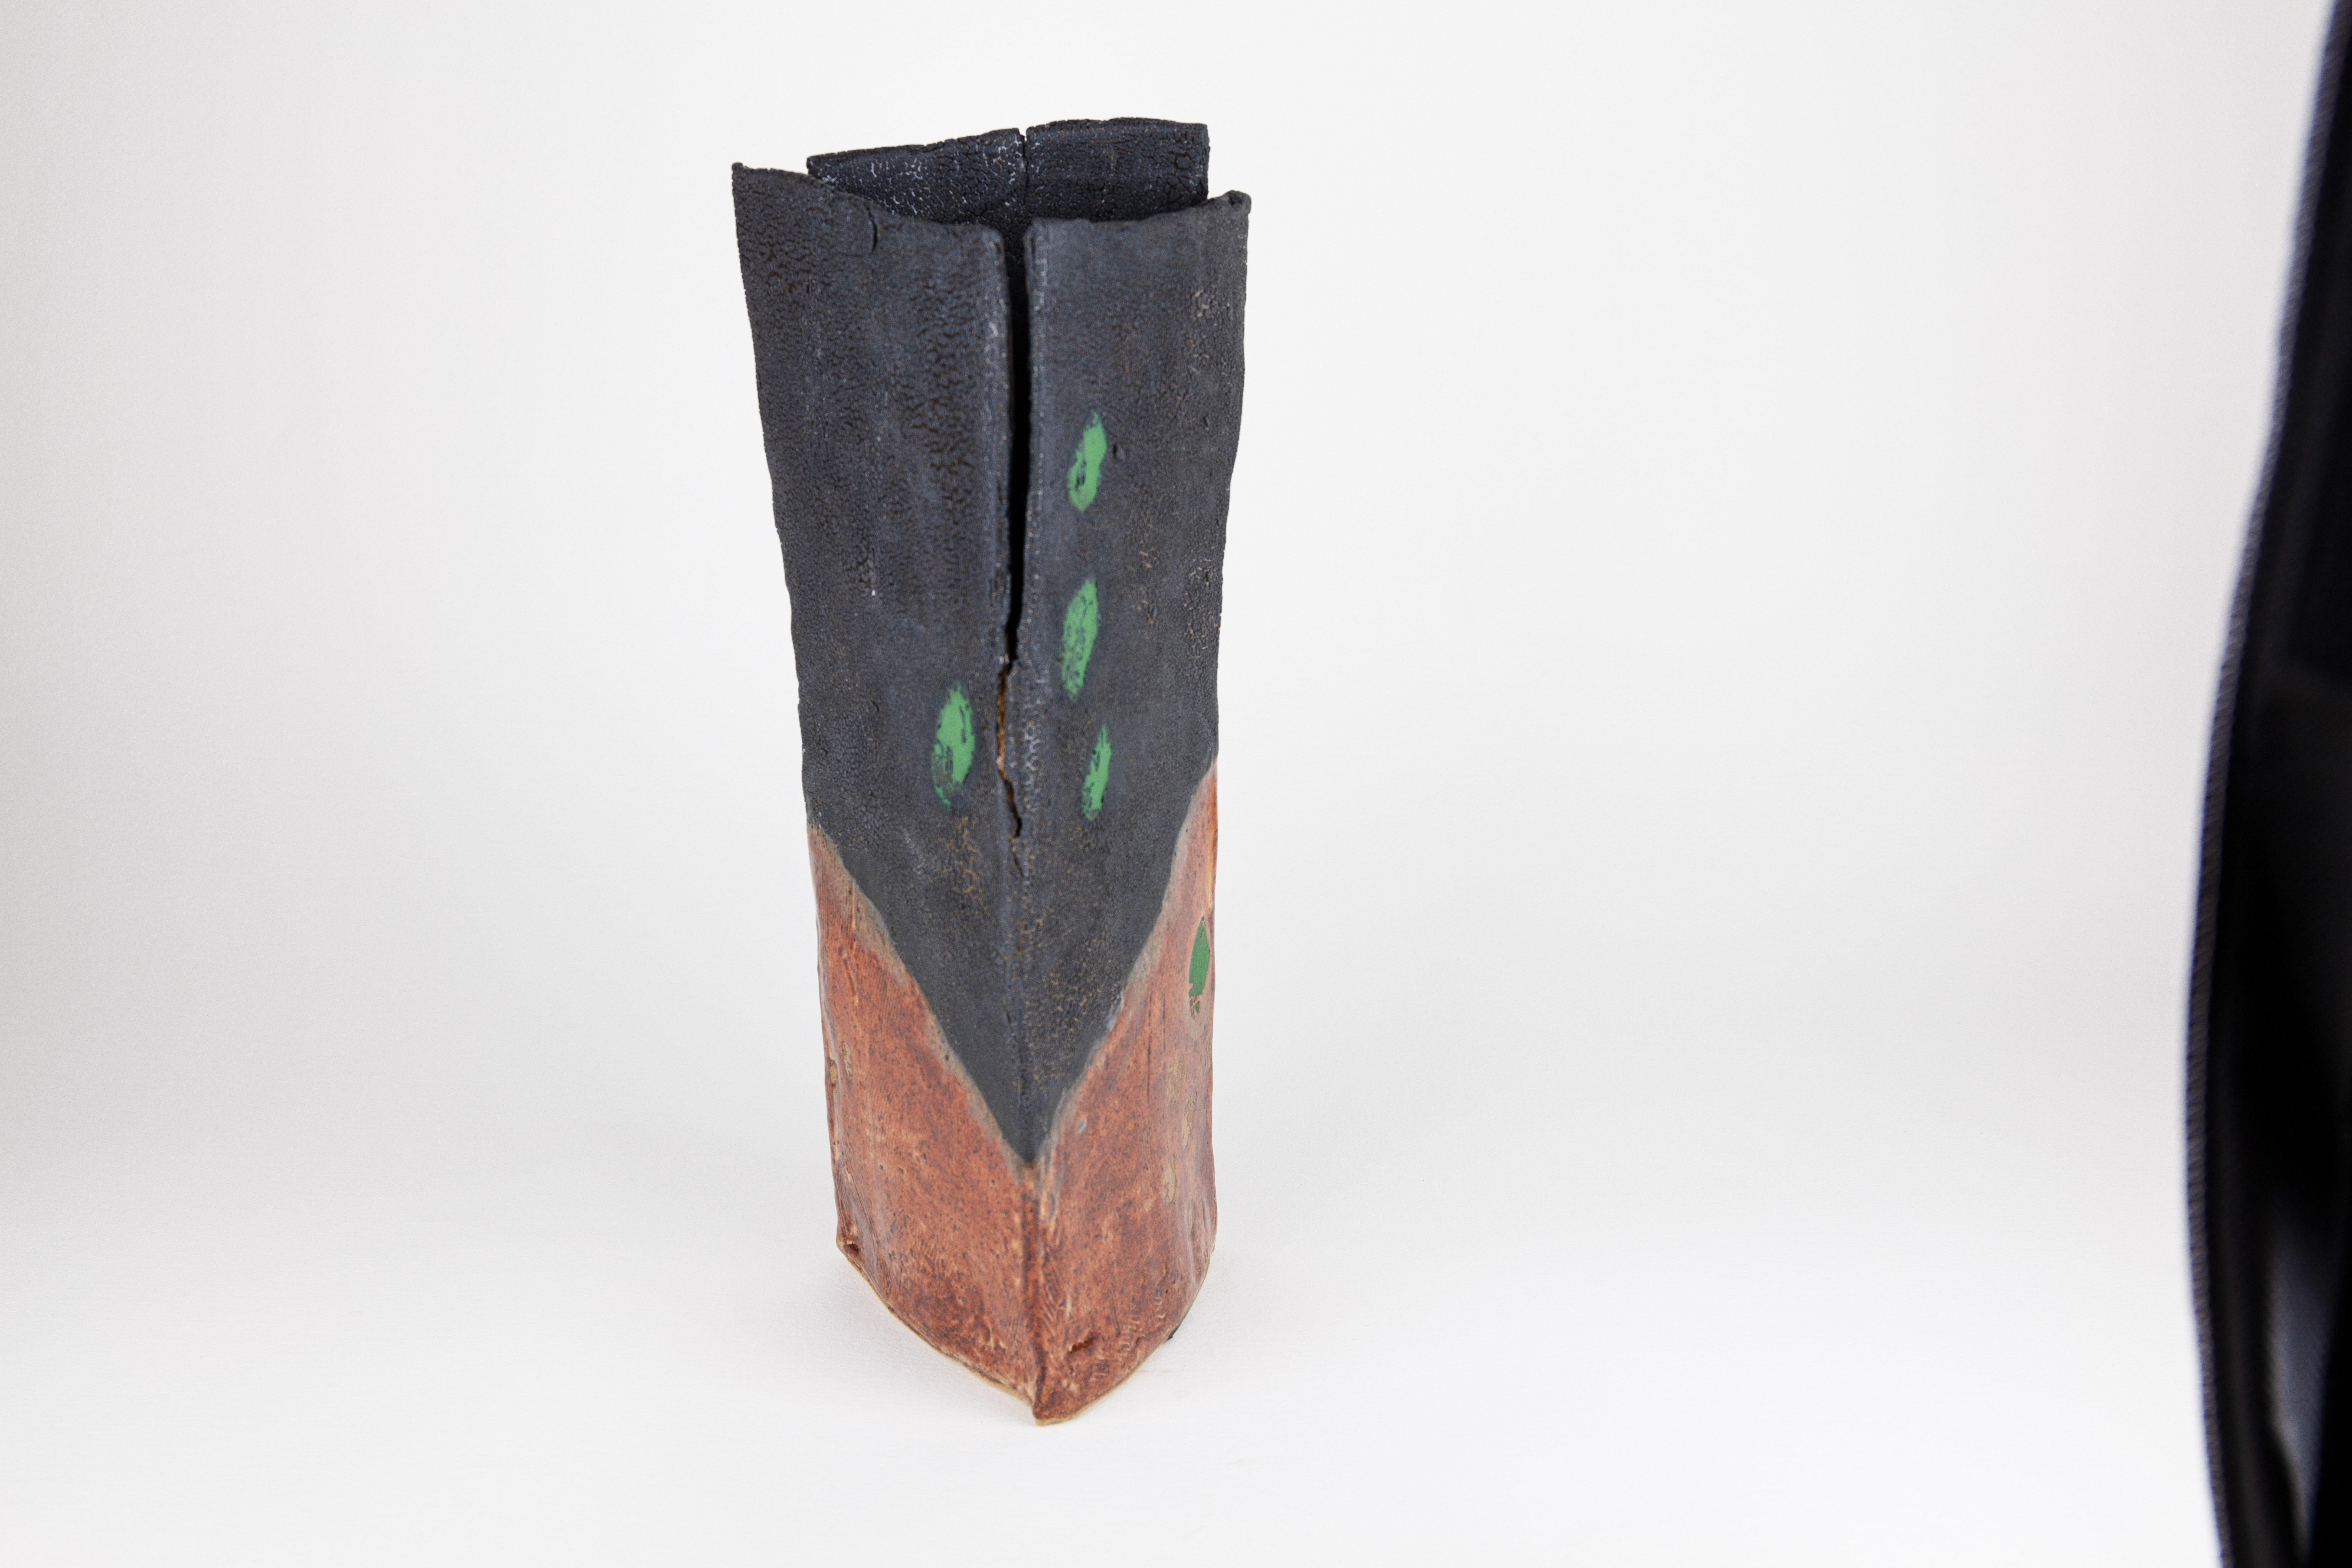 Charred, Abstract ceramic sculpture - Contemporary Sculpture by Rachelle Krieger